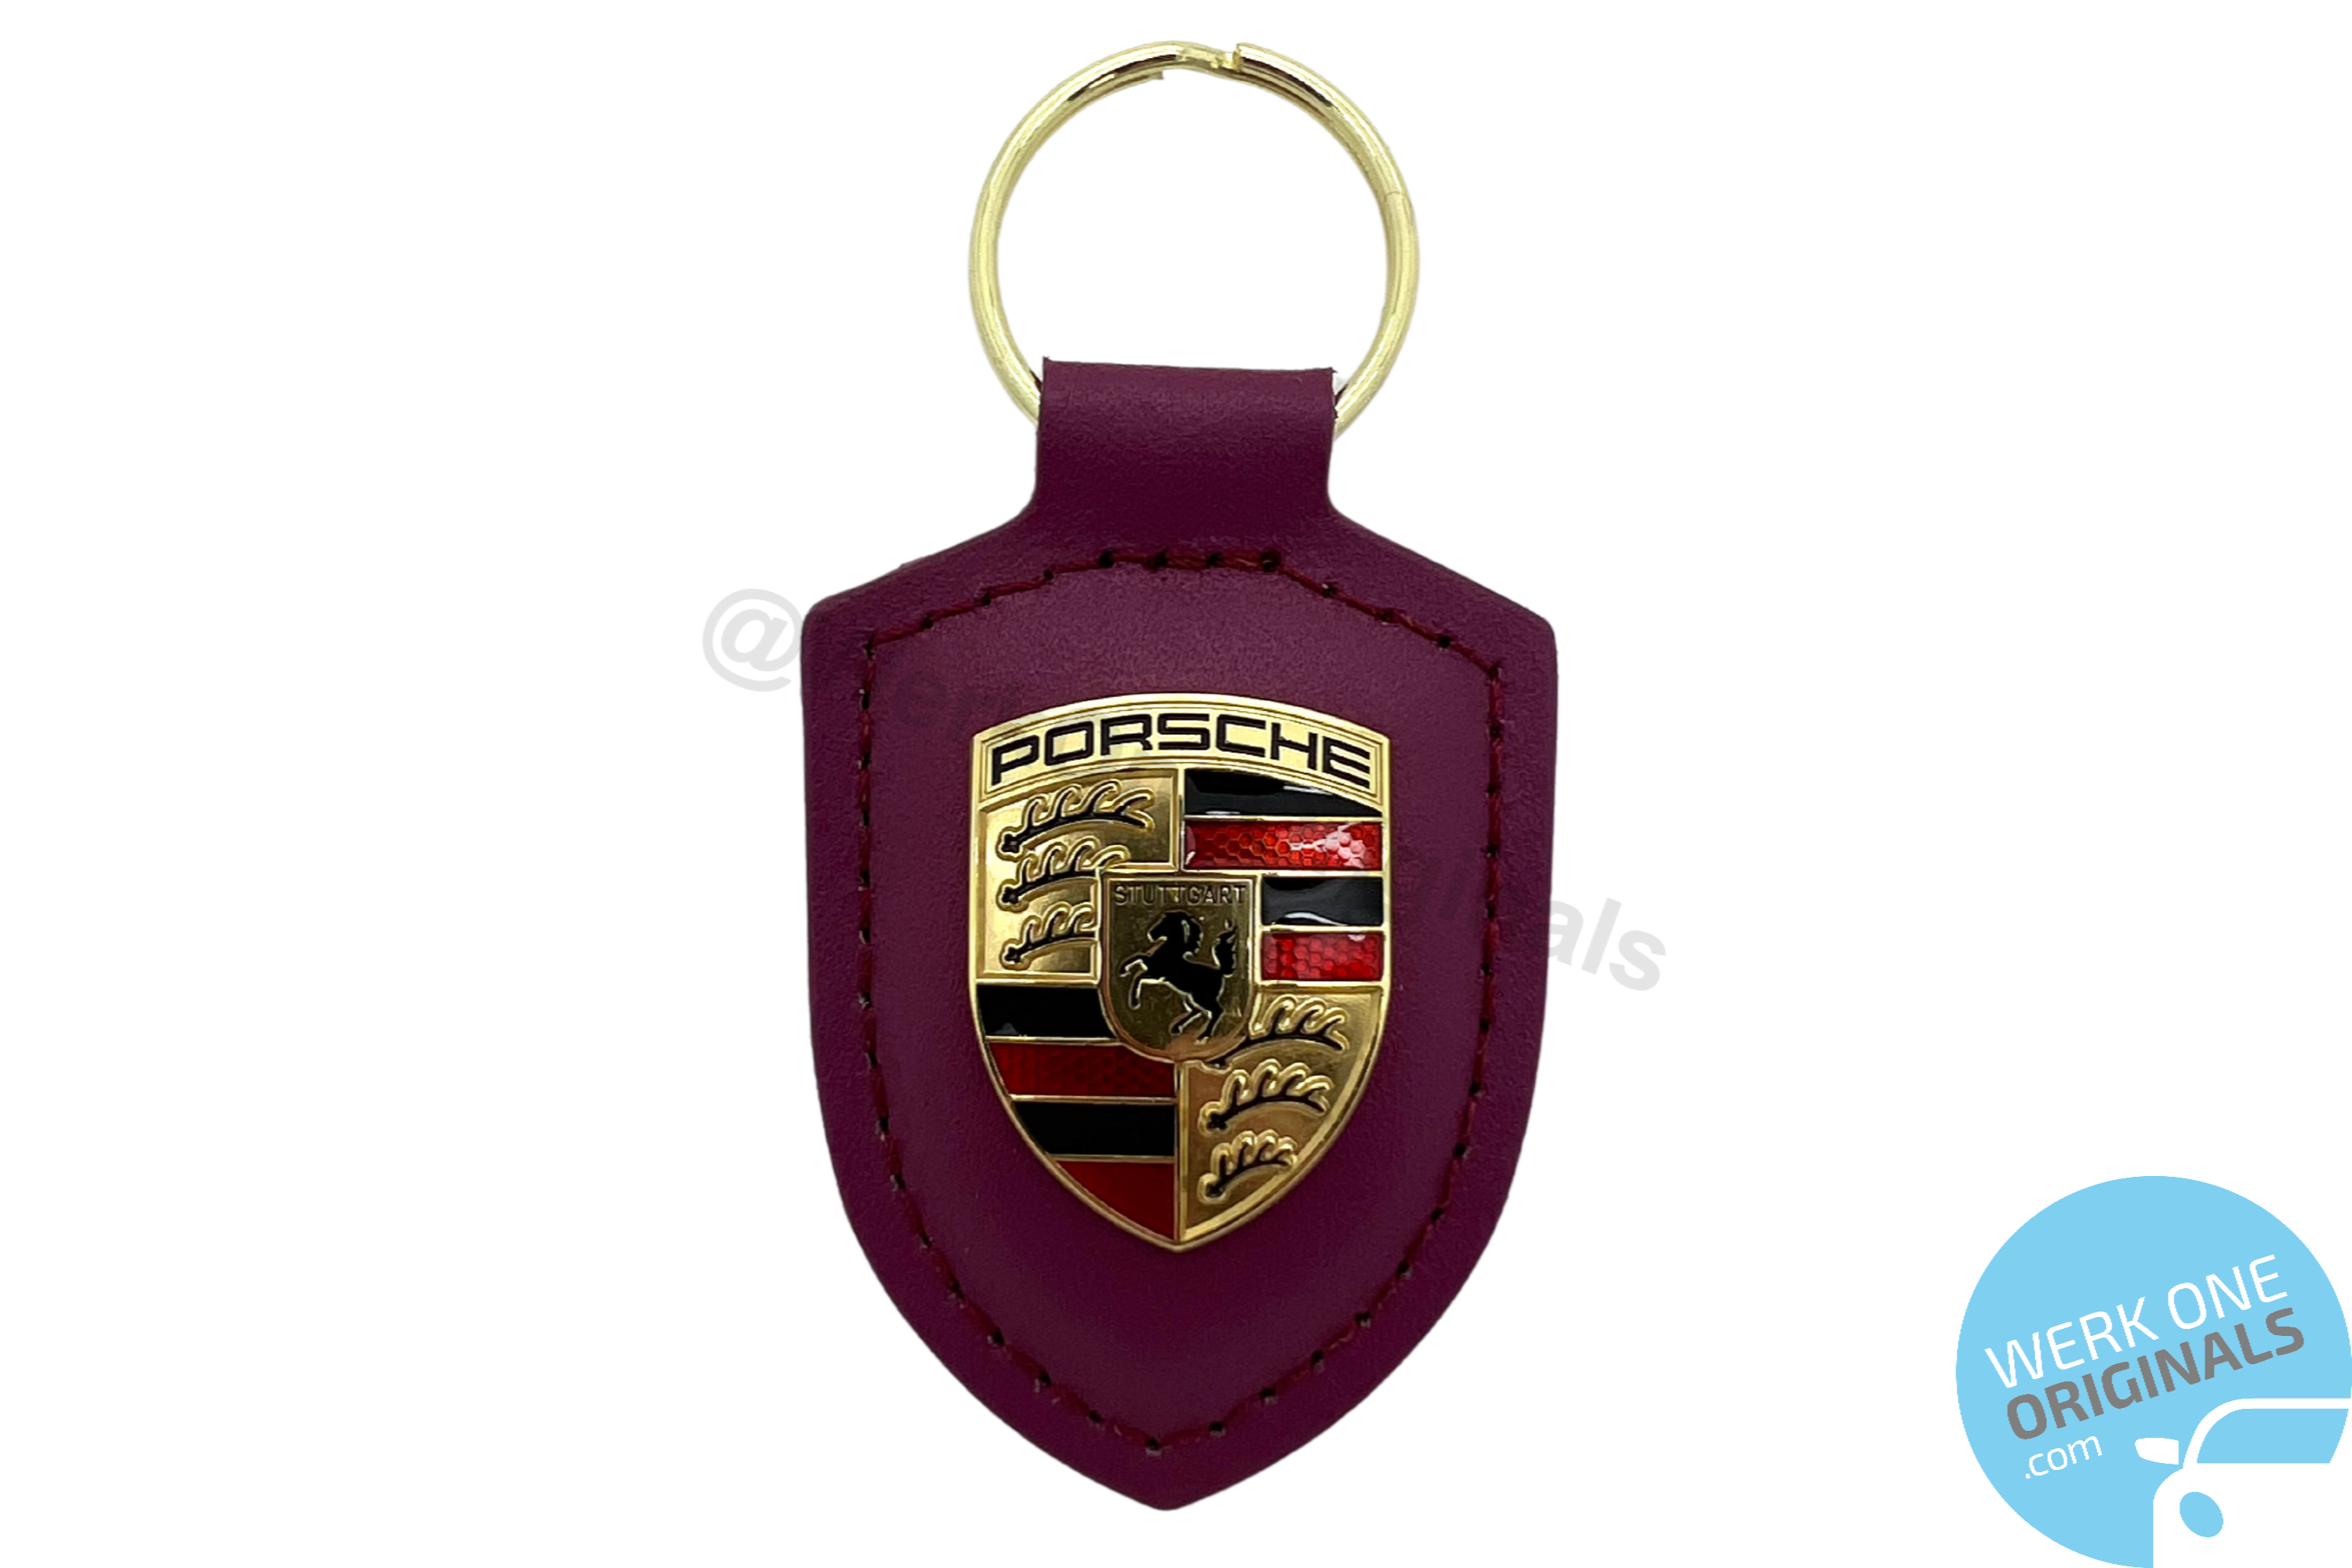 Porsche Official 75 Years Anniversary Limited Edition Key Fob in Rubystar Red